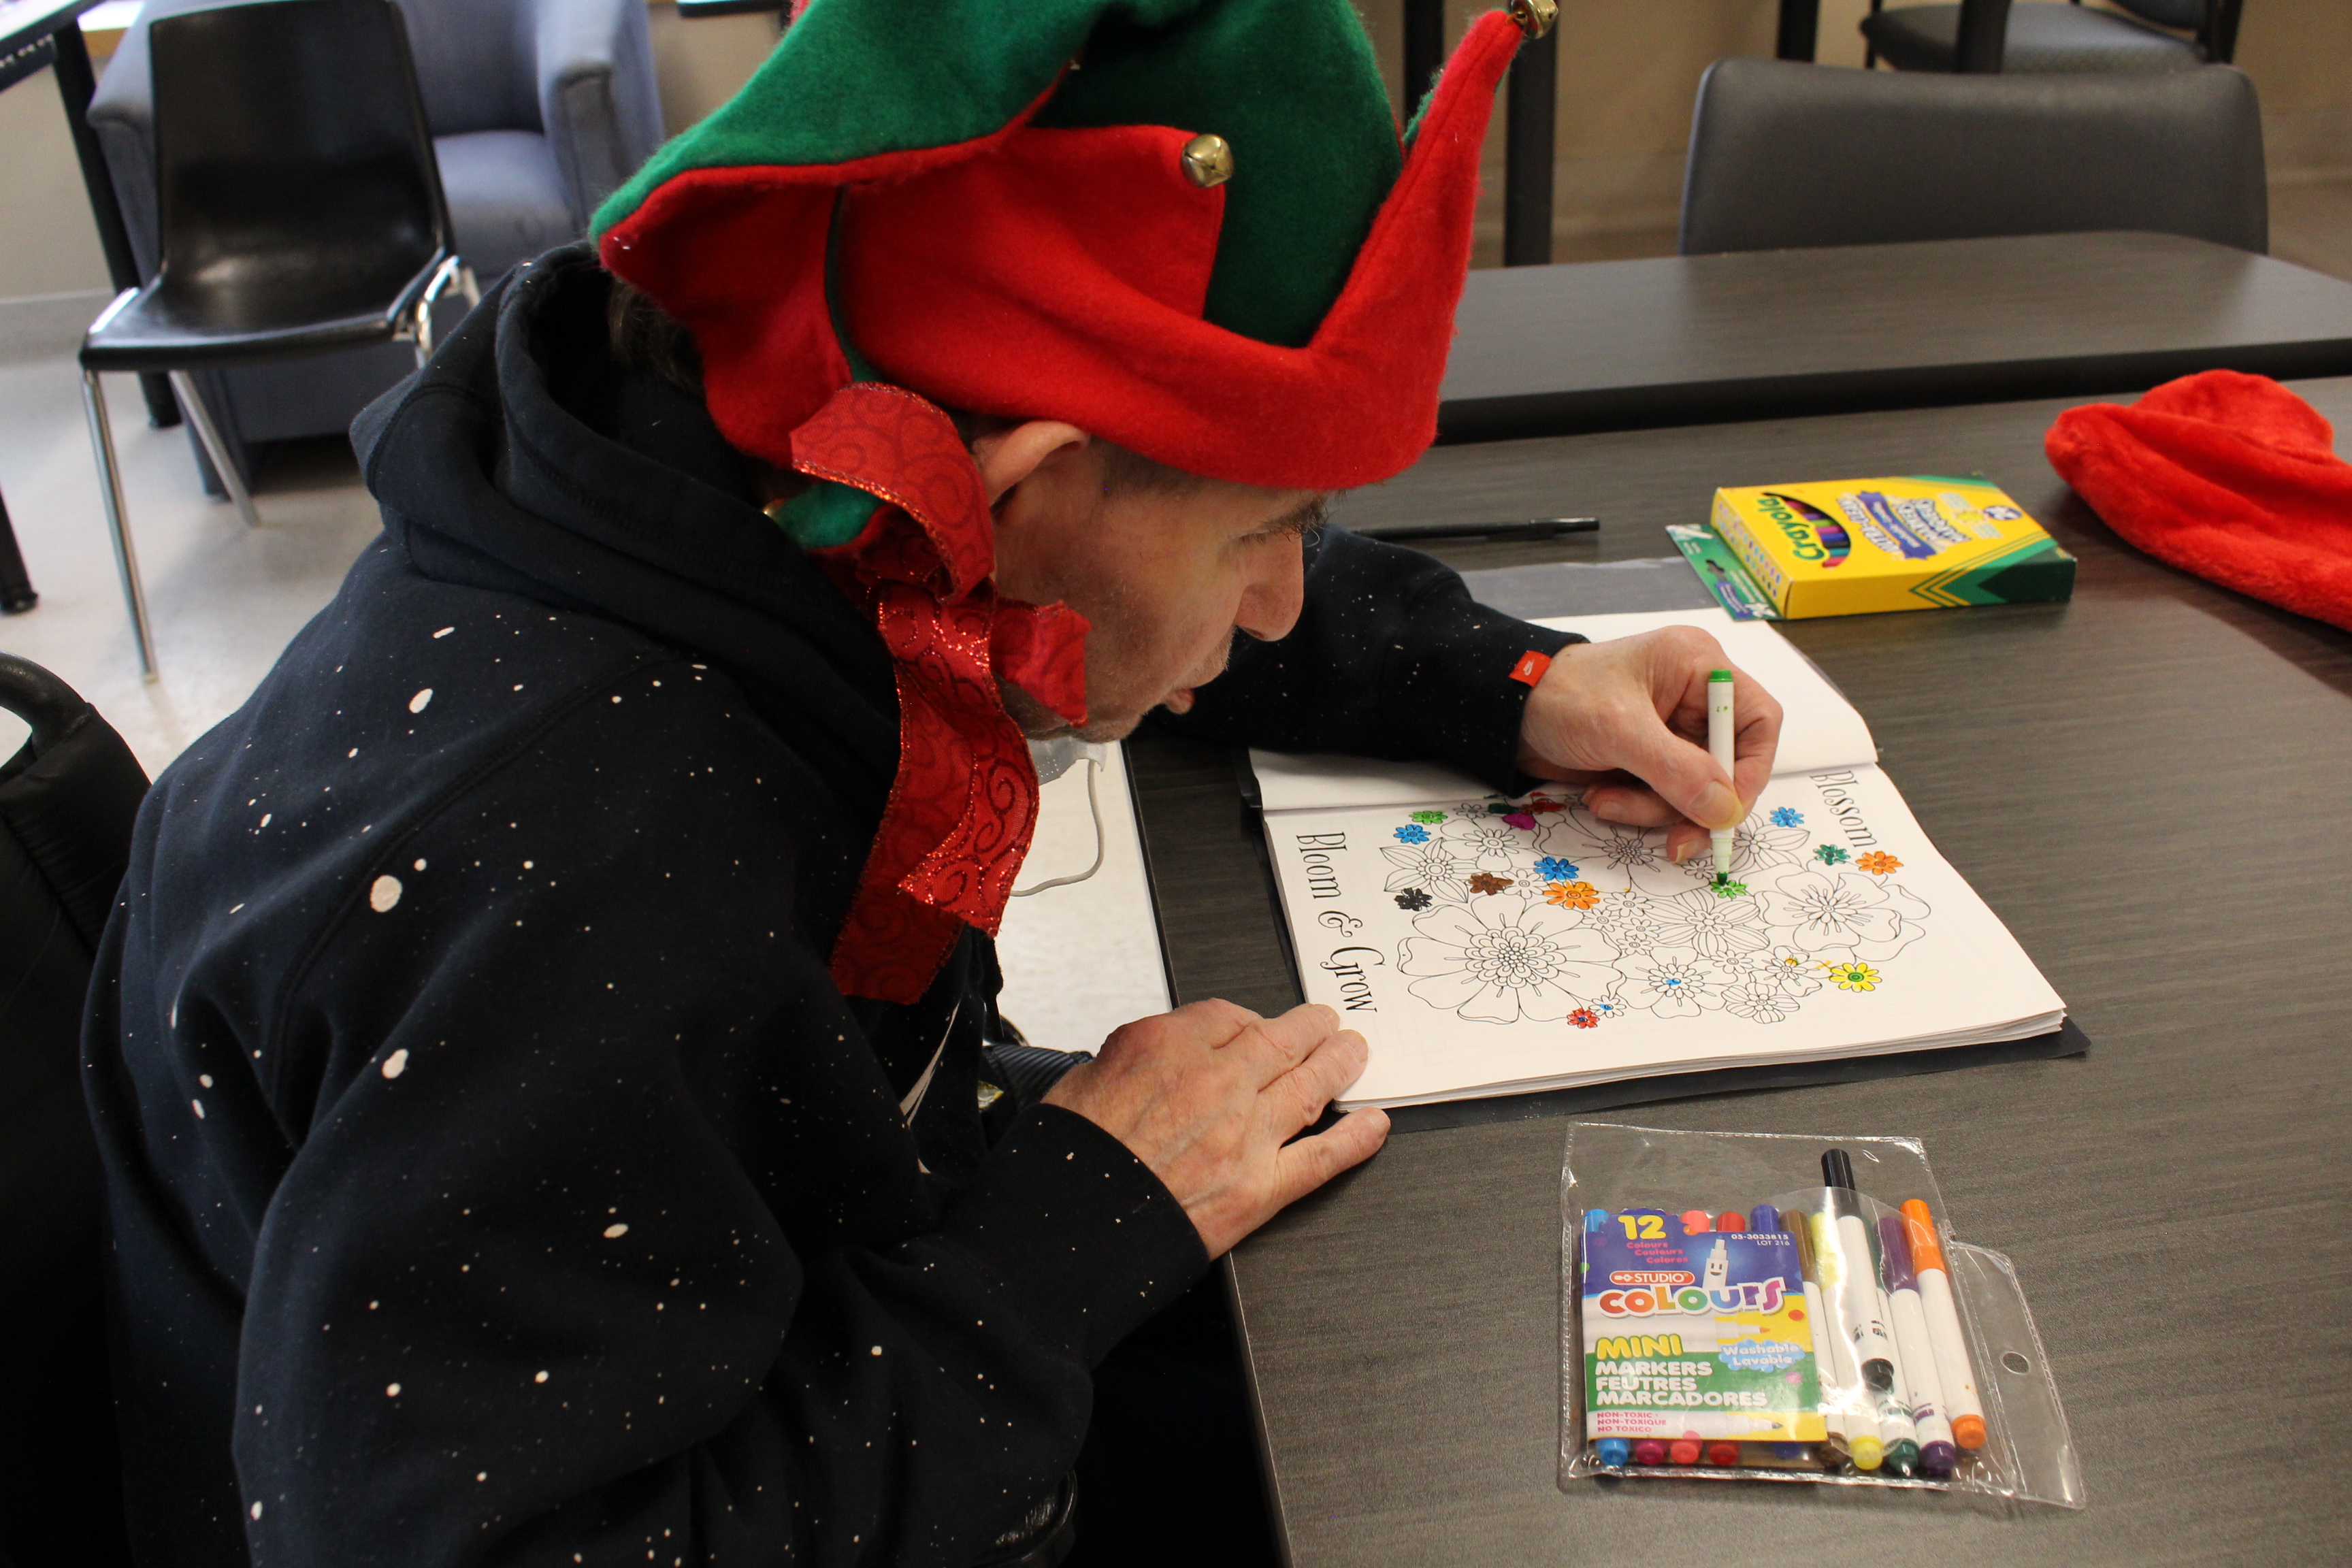 A man in an elf hat is seen colouring a picture of flowers.